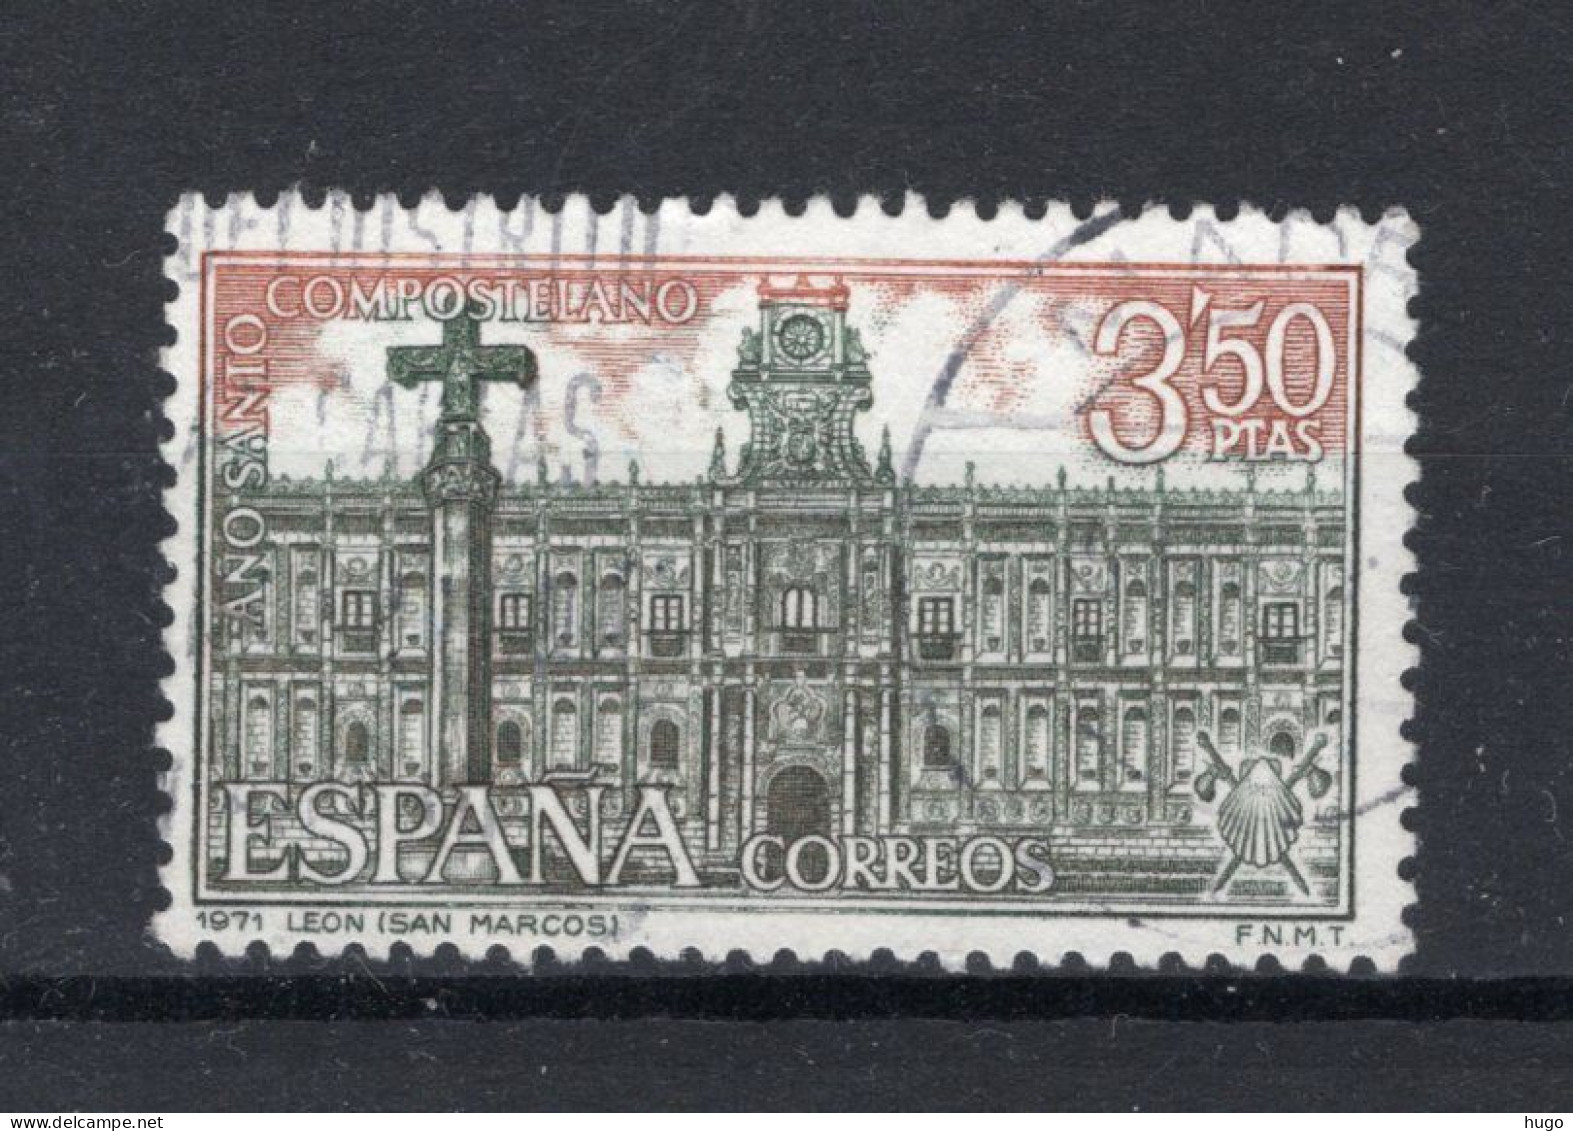 SPANJE Yt. 1722° Gestempeld 1971 - Used Stamps